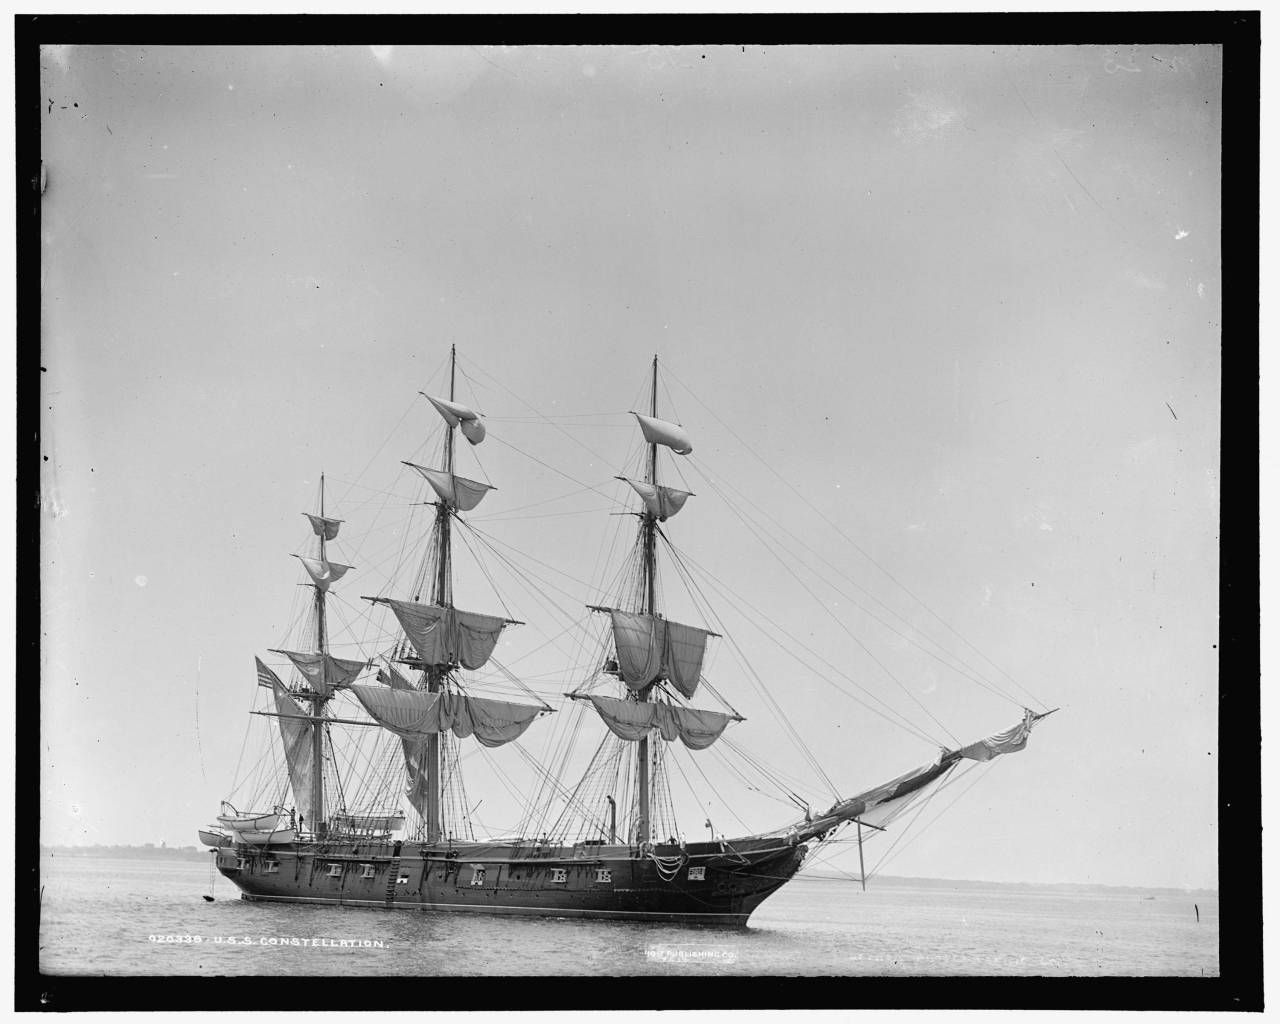 anchors-aweigh-navy:Sloop of war USS Constellation at anchor in 1890. She is now preserved as a museum ship in Philadelphia. 